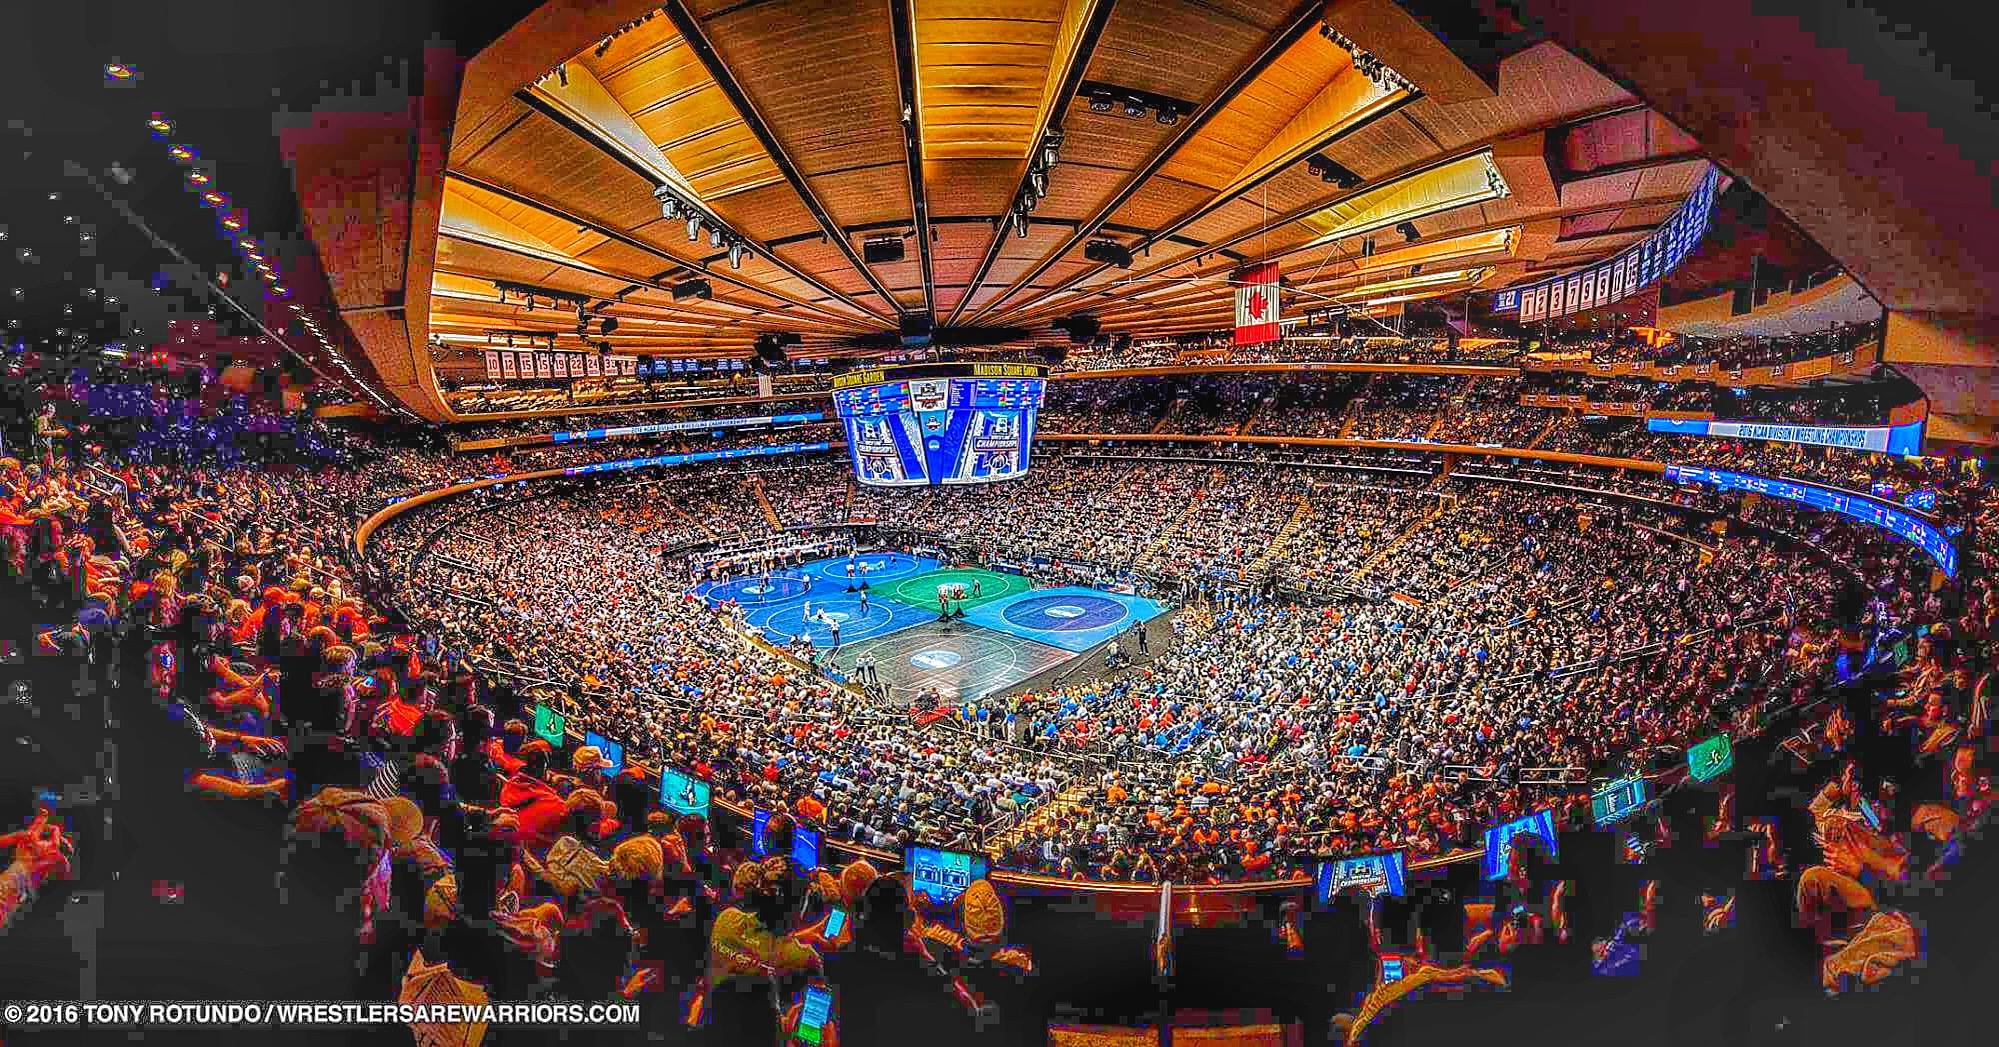 New Record for Wrestling’s Biggest Tournament Attendance: 112,380